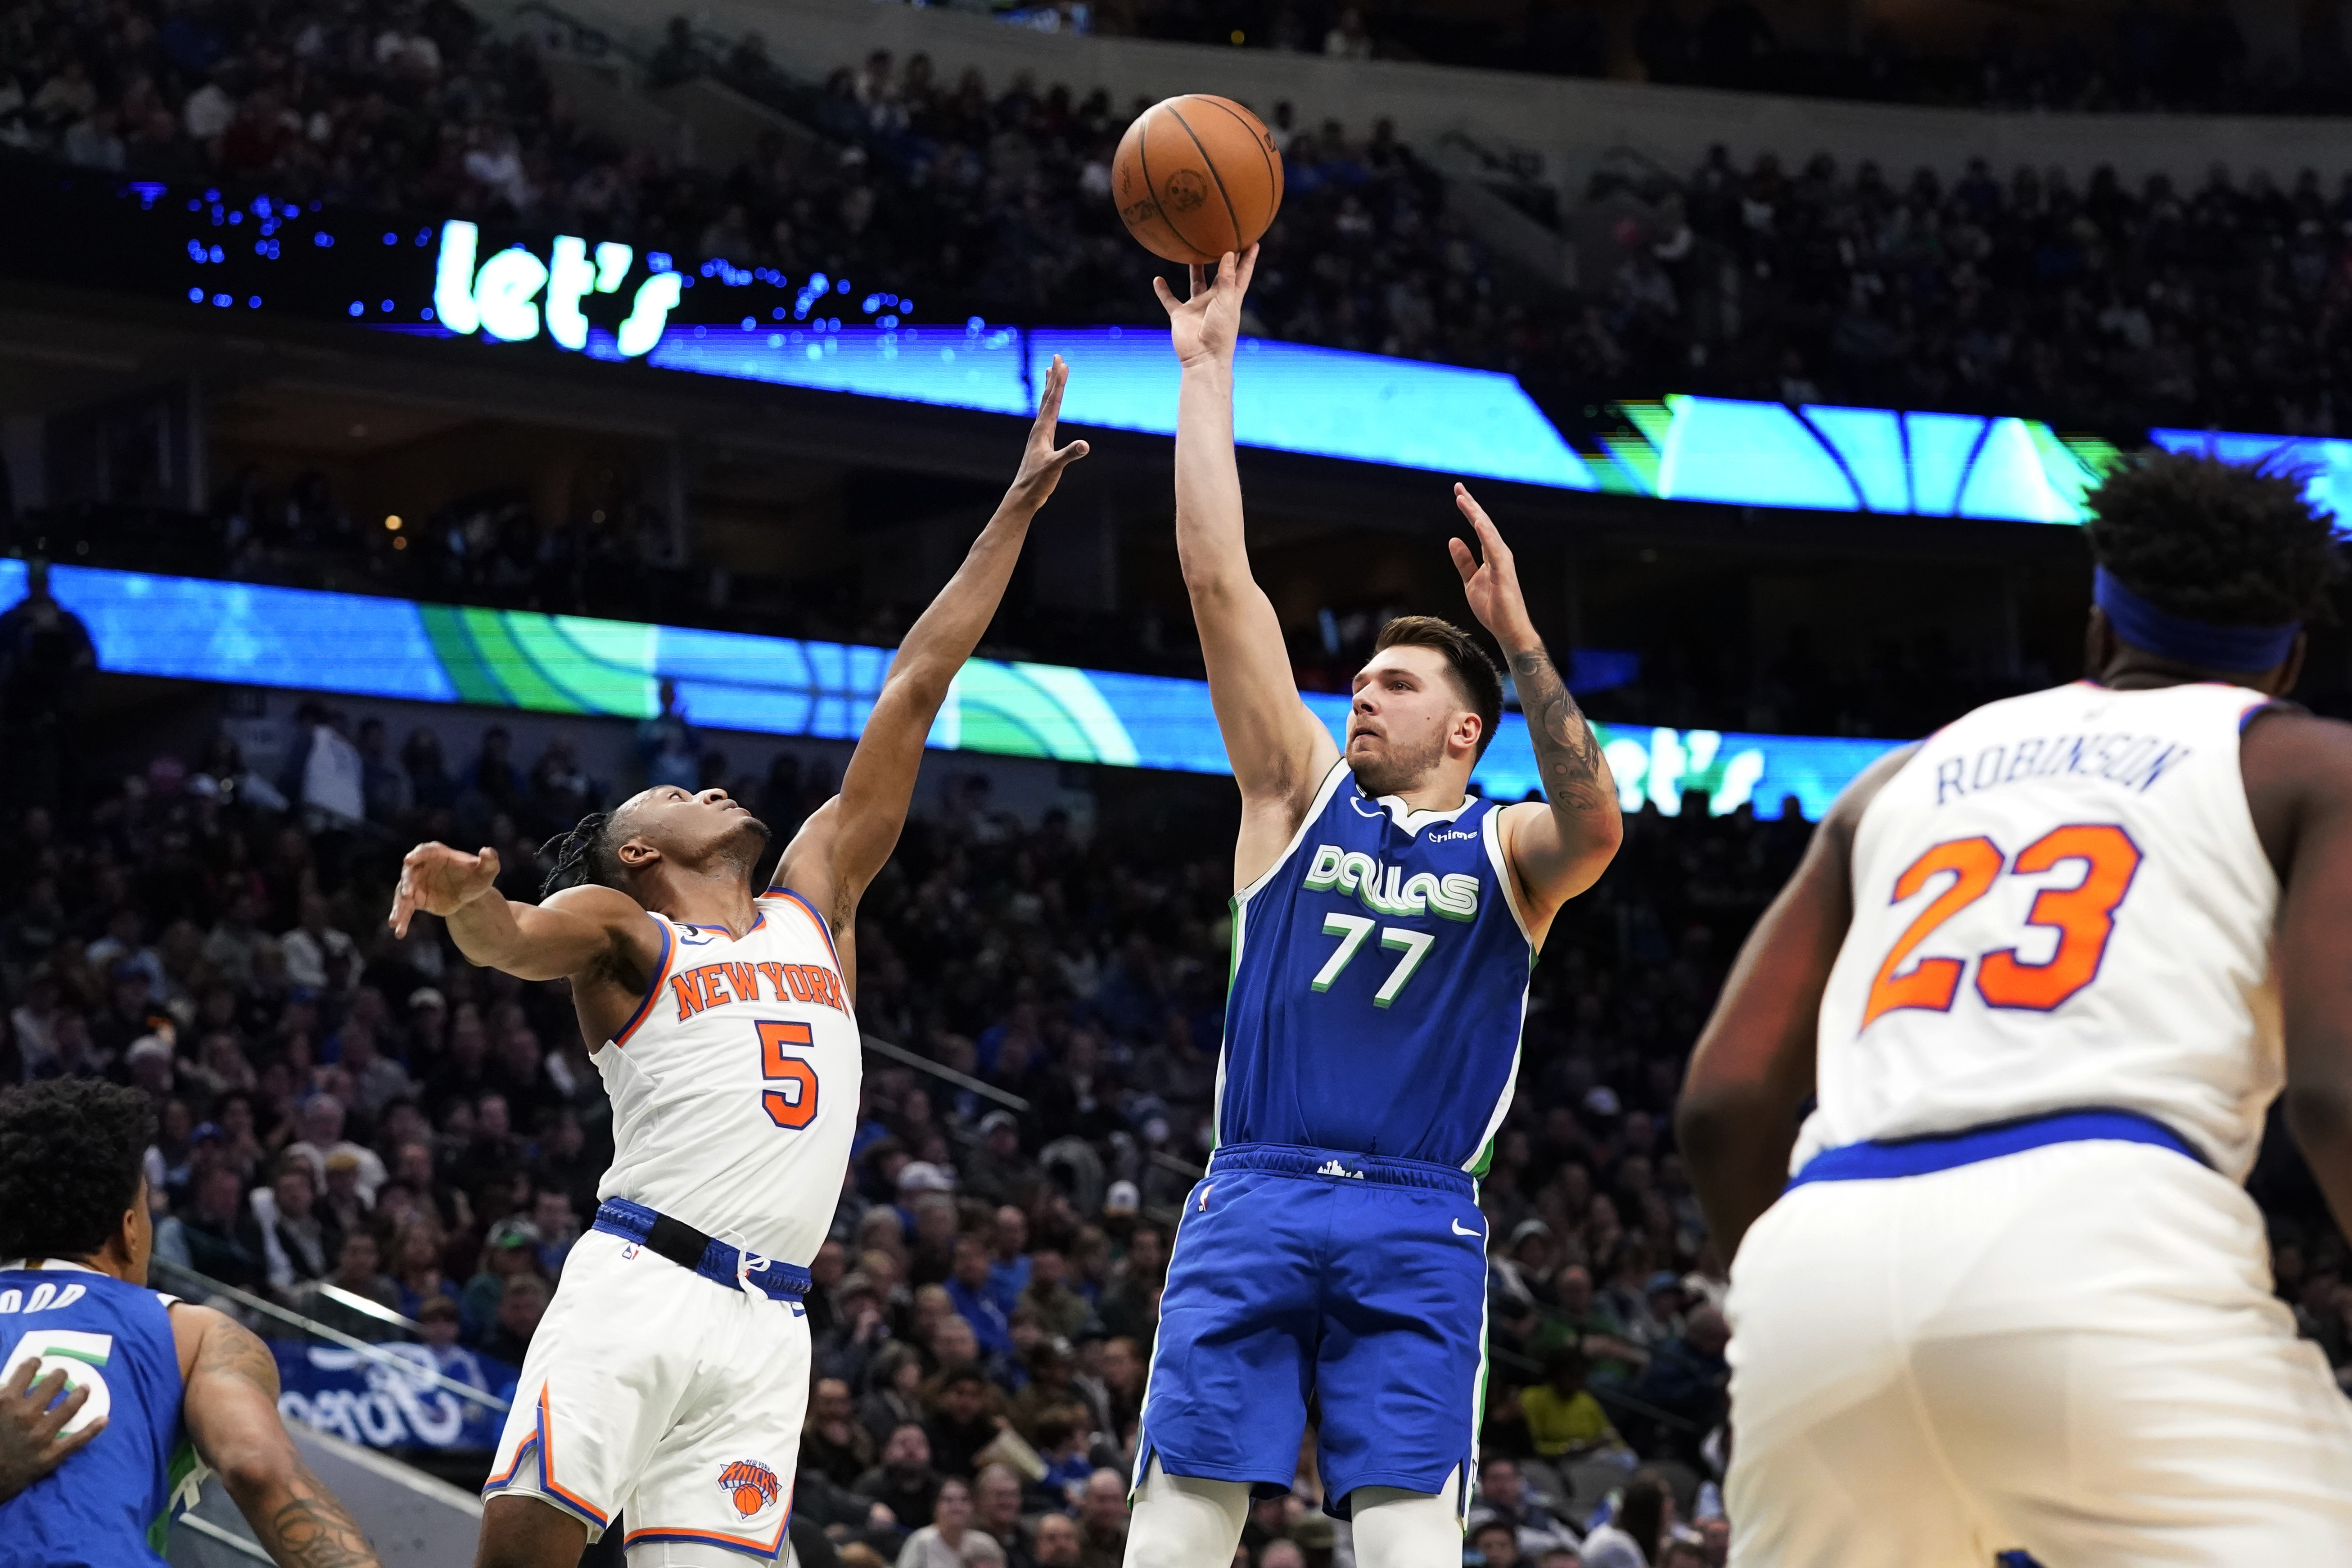 Luka Doncic saying he needed a 'recovery beer' after historic game